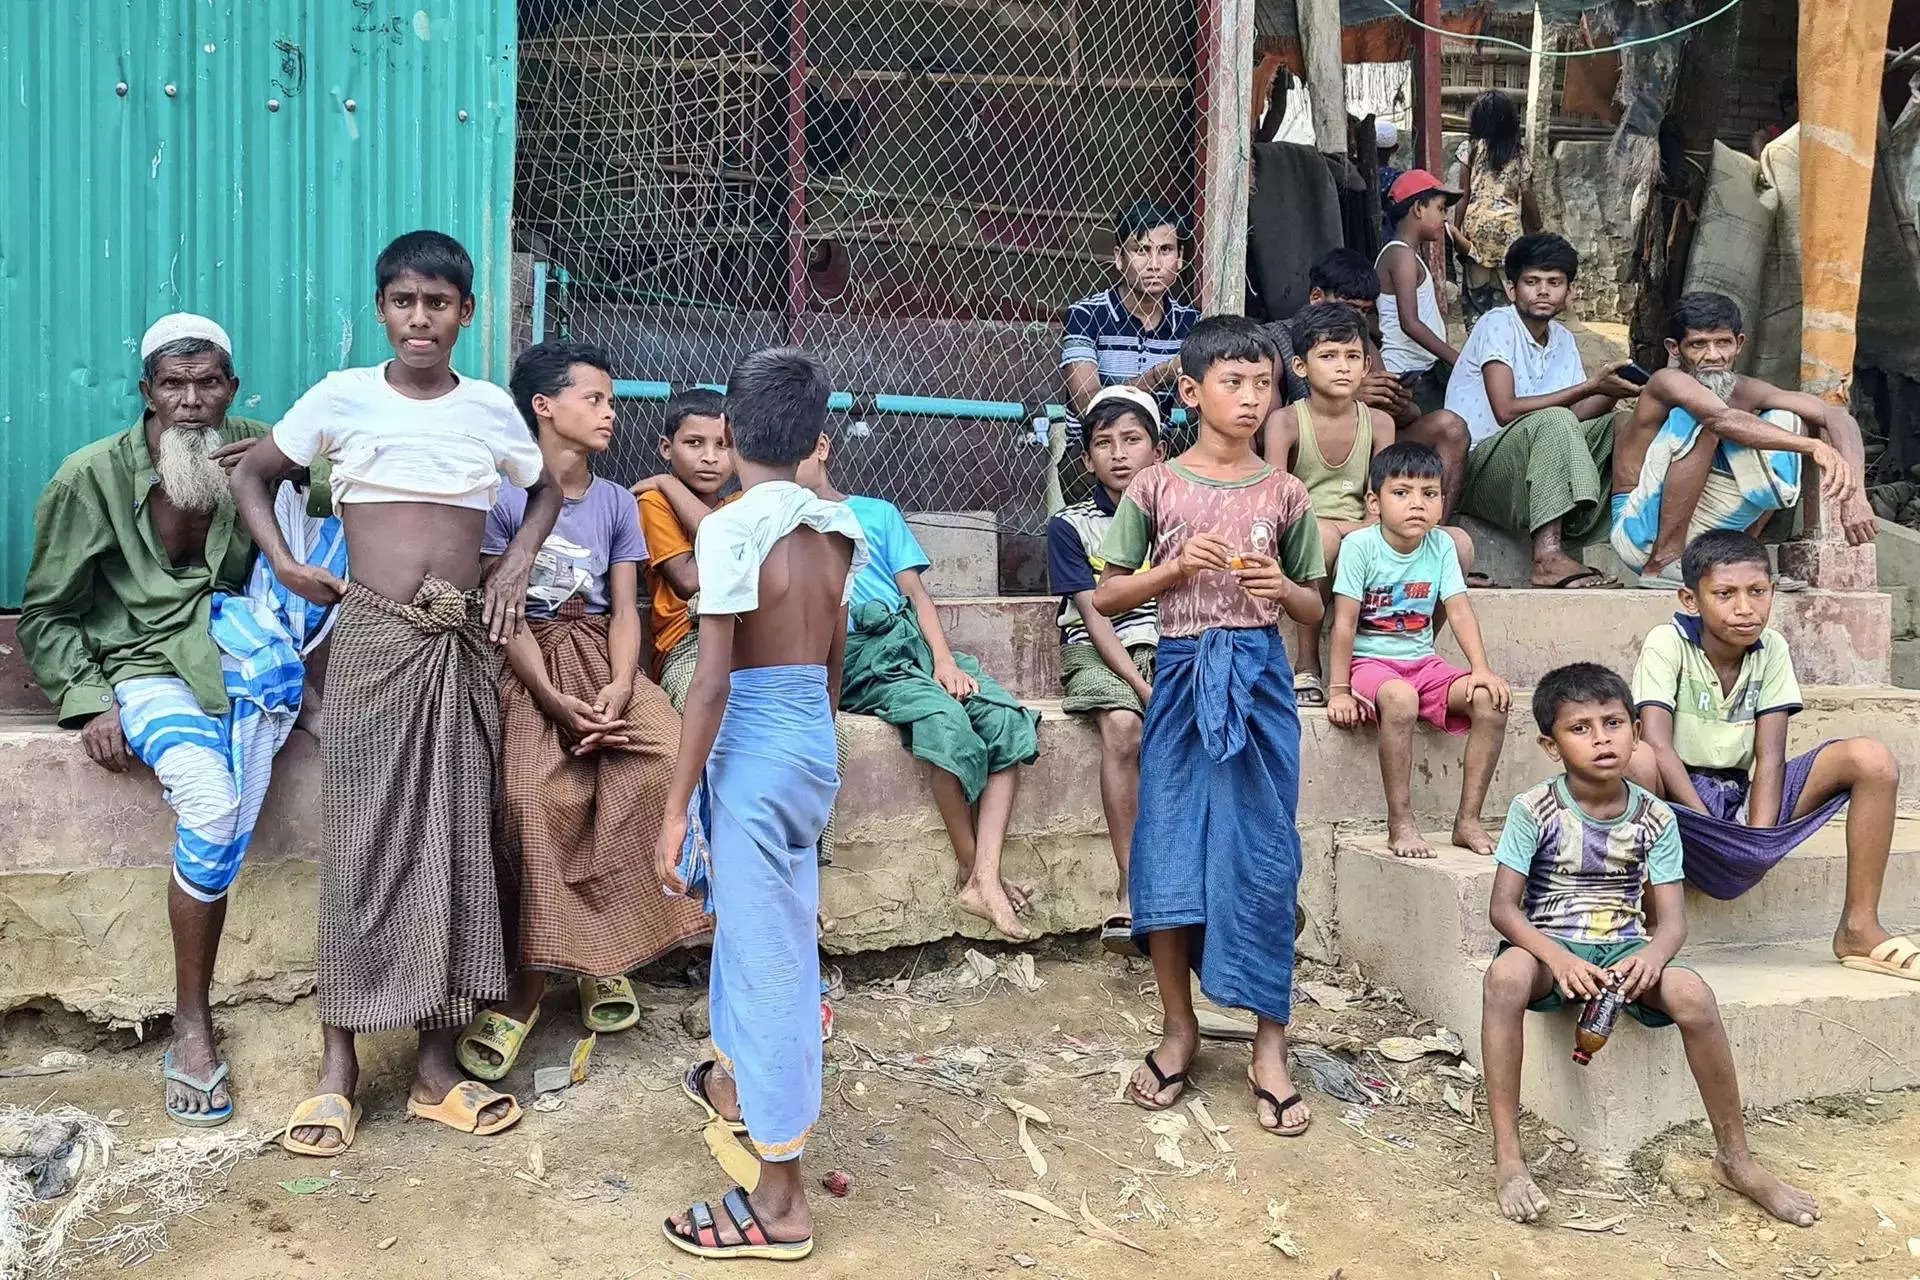 Thousands of Rohingya feared trapped in fighting in western Myanmar